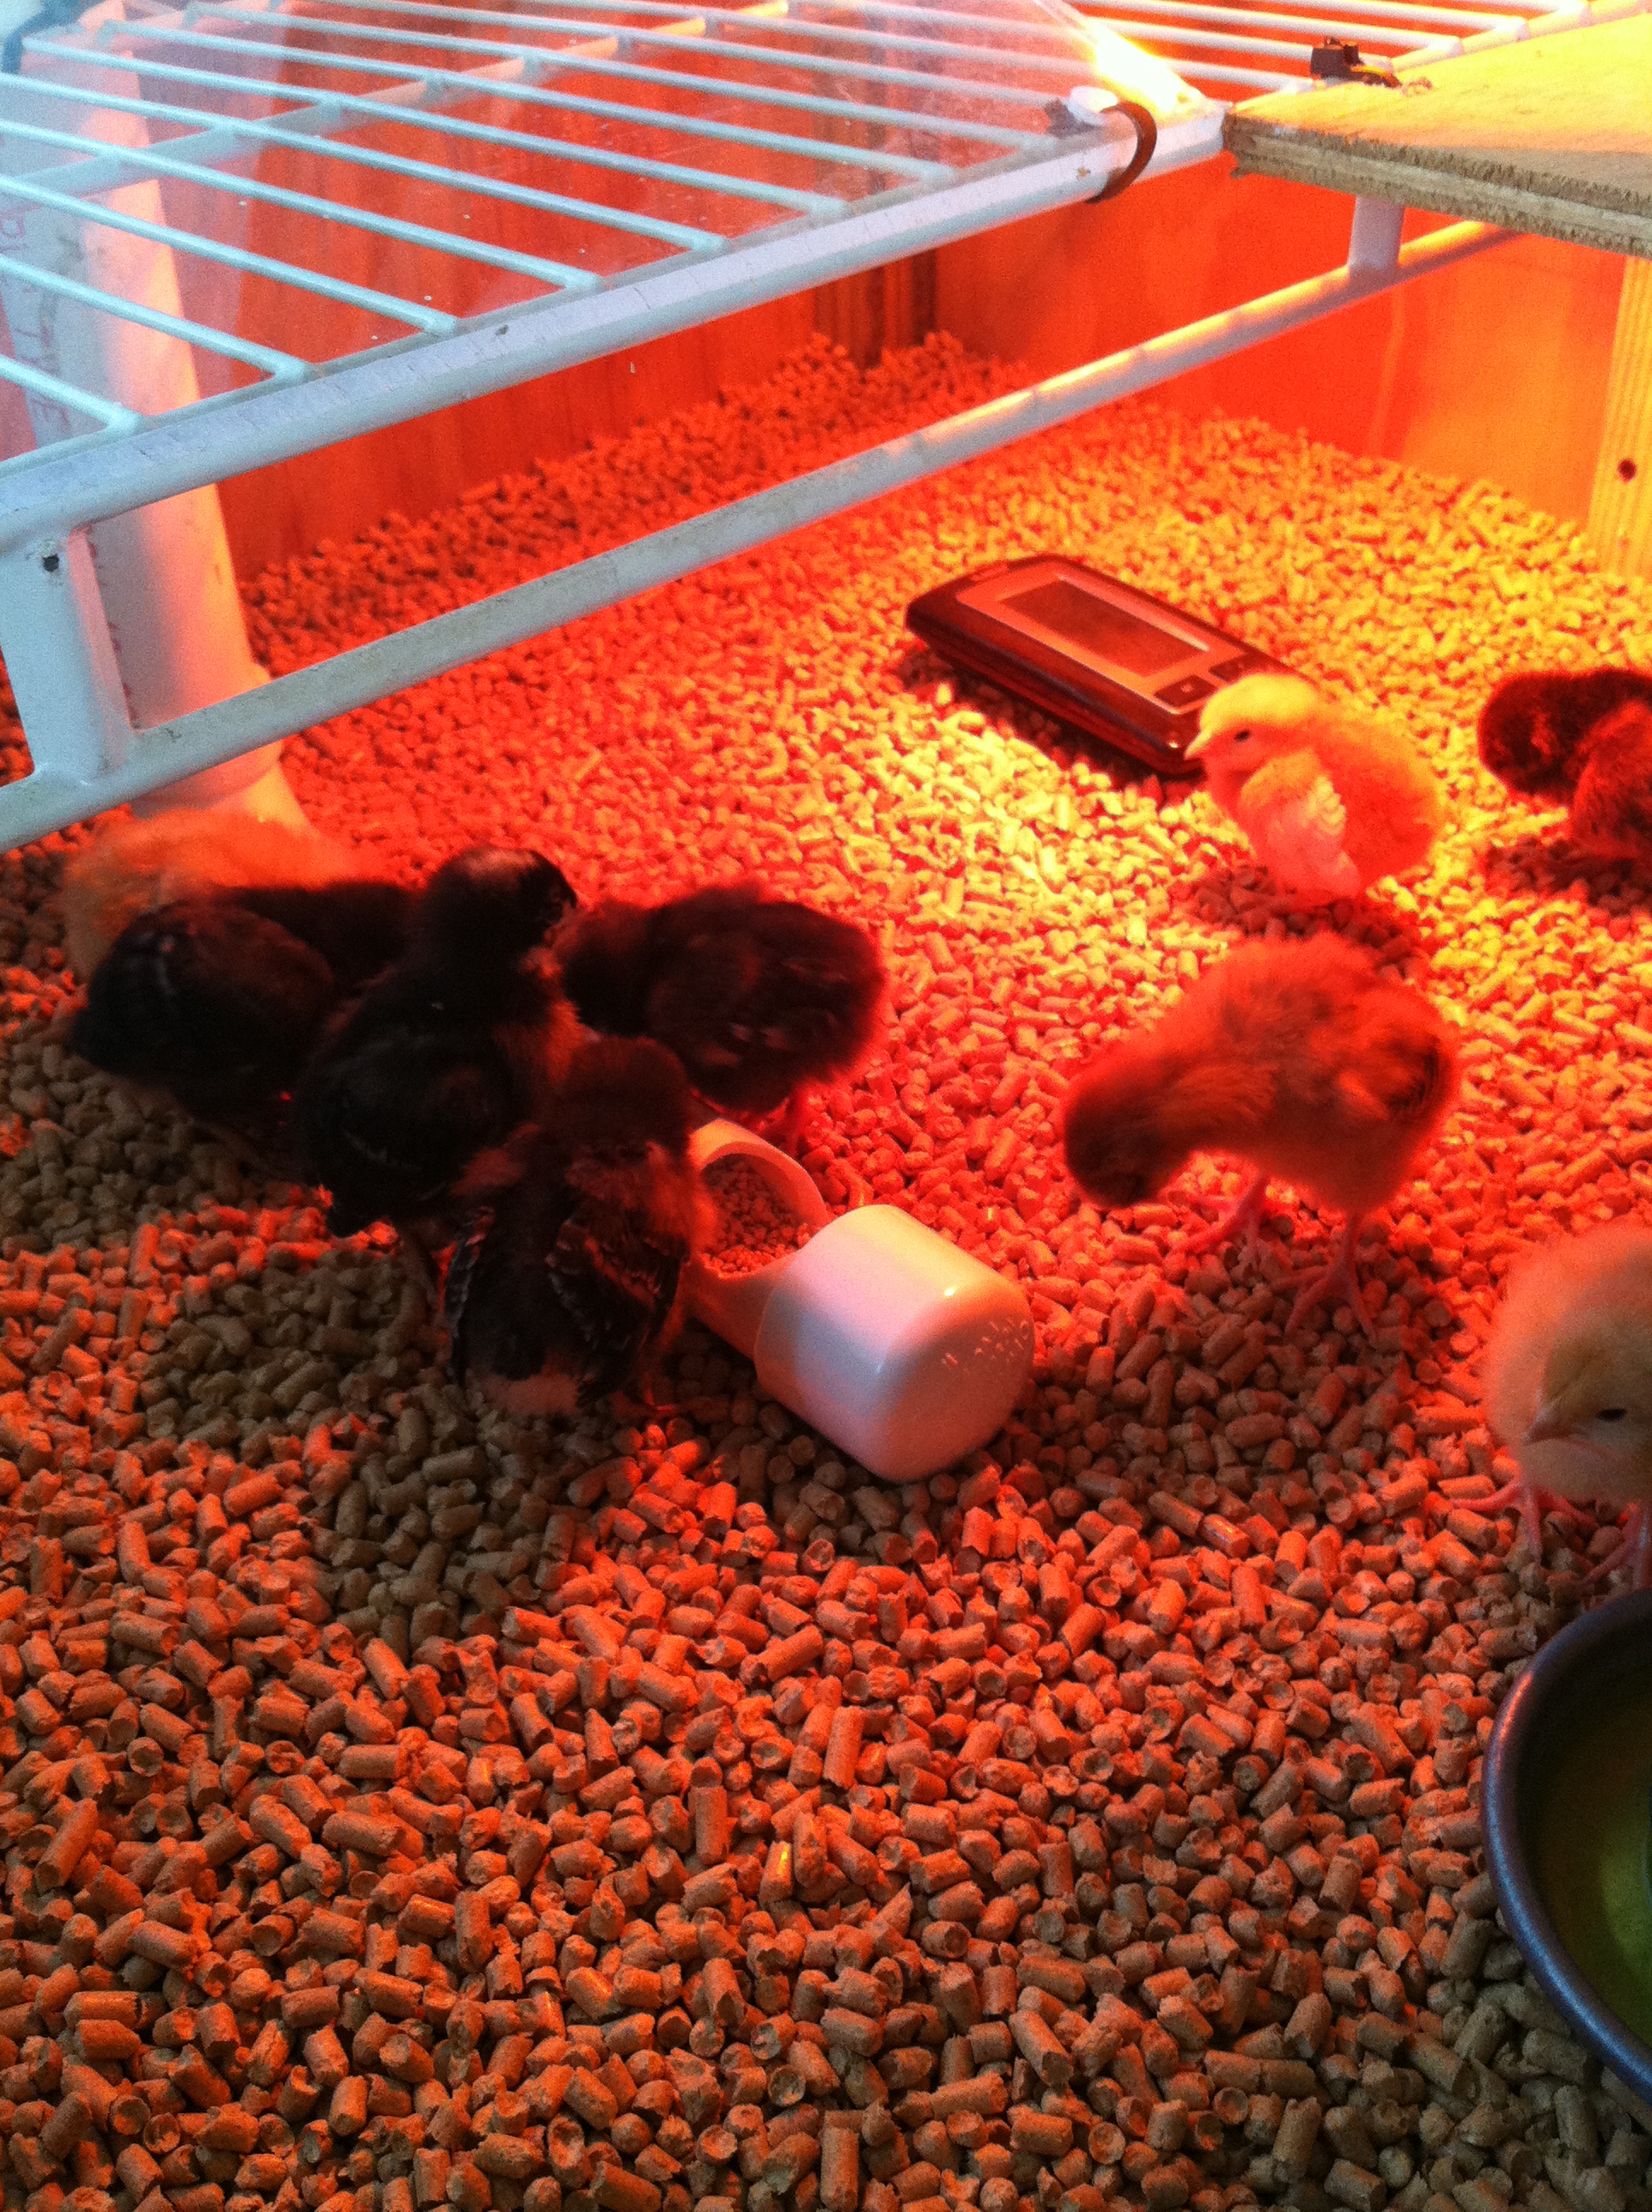 The rest of the chicks at about 1 week old.  I bought them from The Poultry House in Franklin, TN.  You can find them on Facebook.  I bought 2 gold Sex Links, 4 Dominiques, 1 Ameraucanas and 1 Welsummer.  I only plan to keep 5 total.